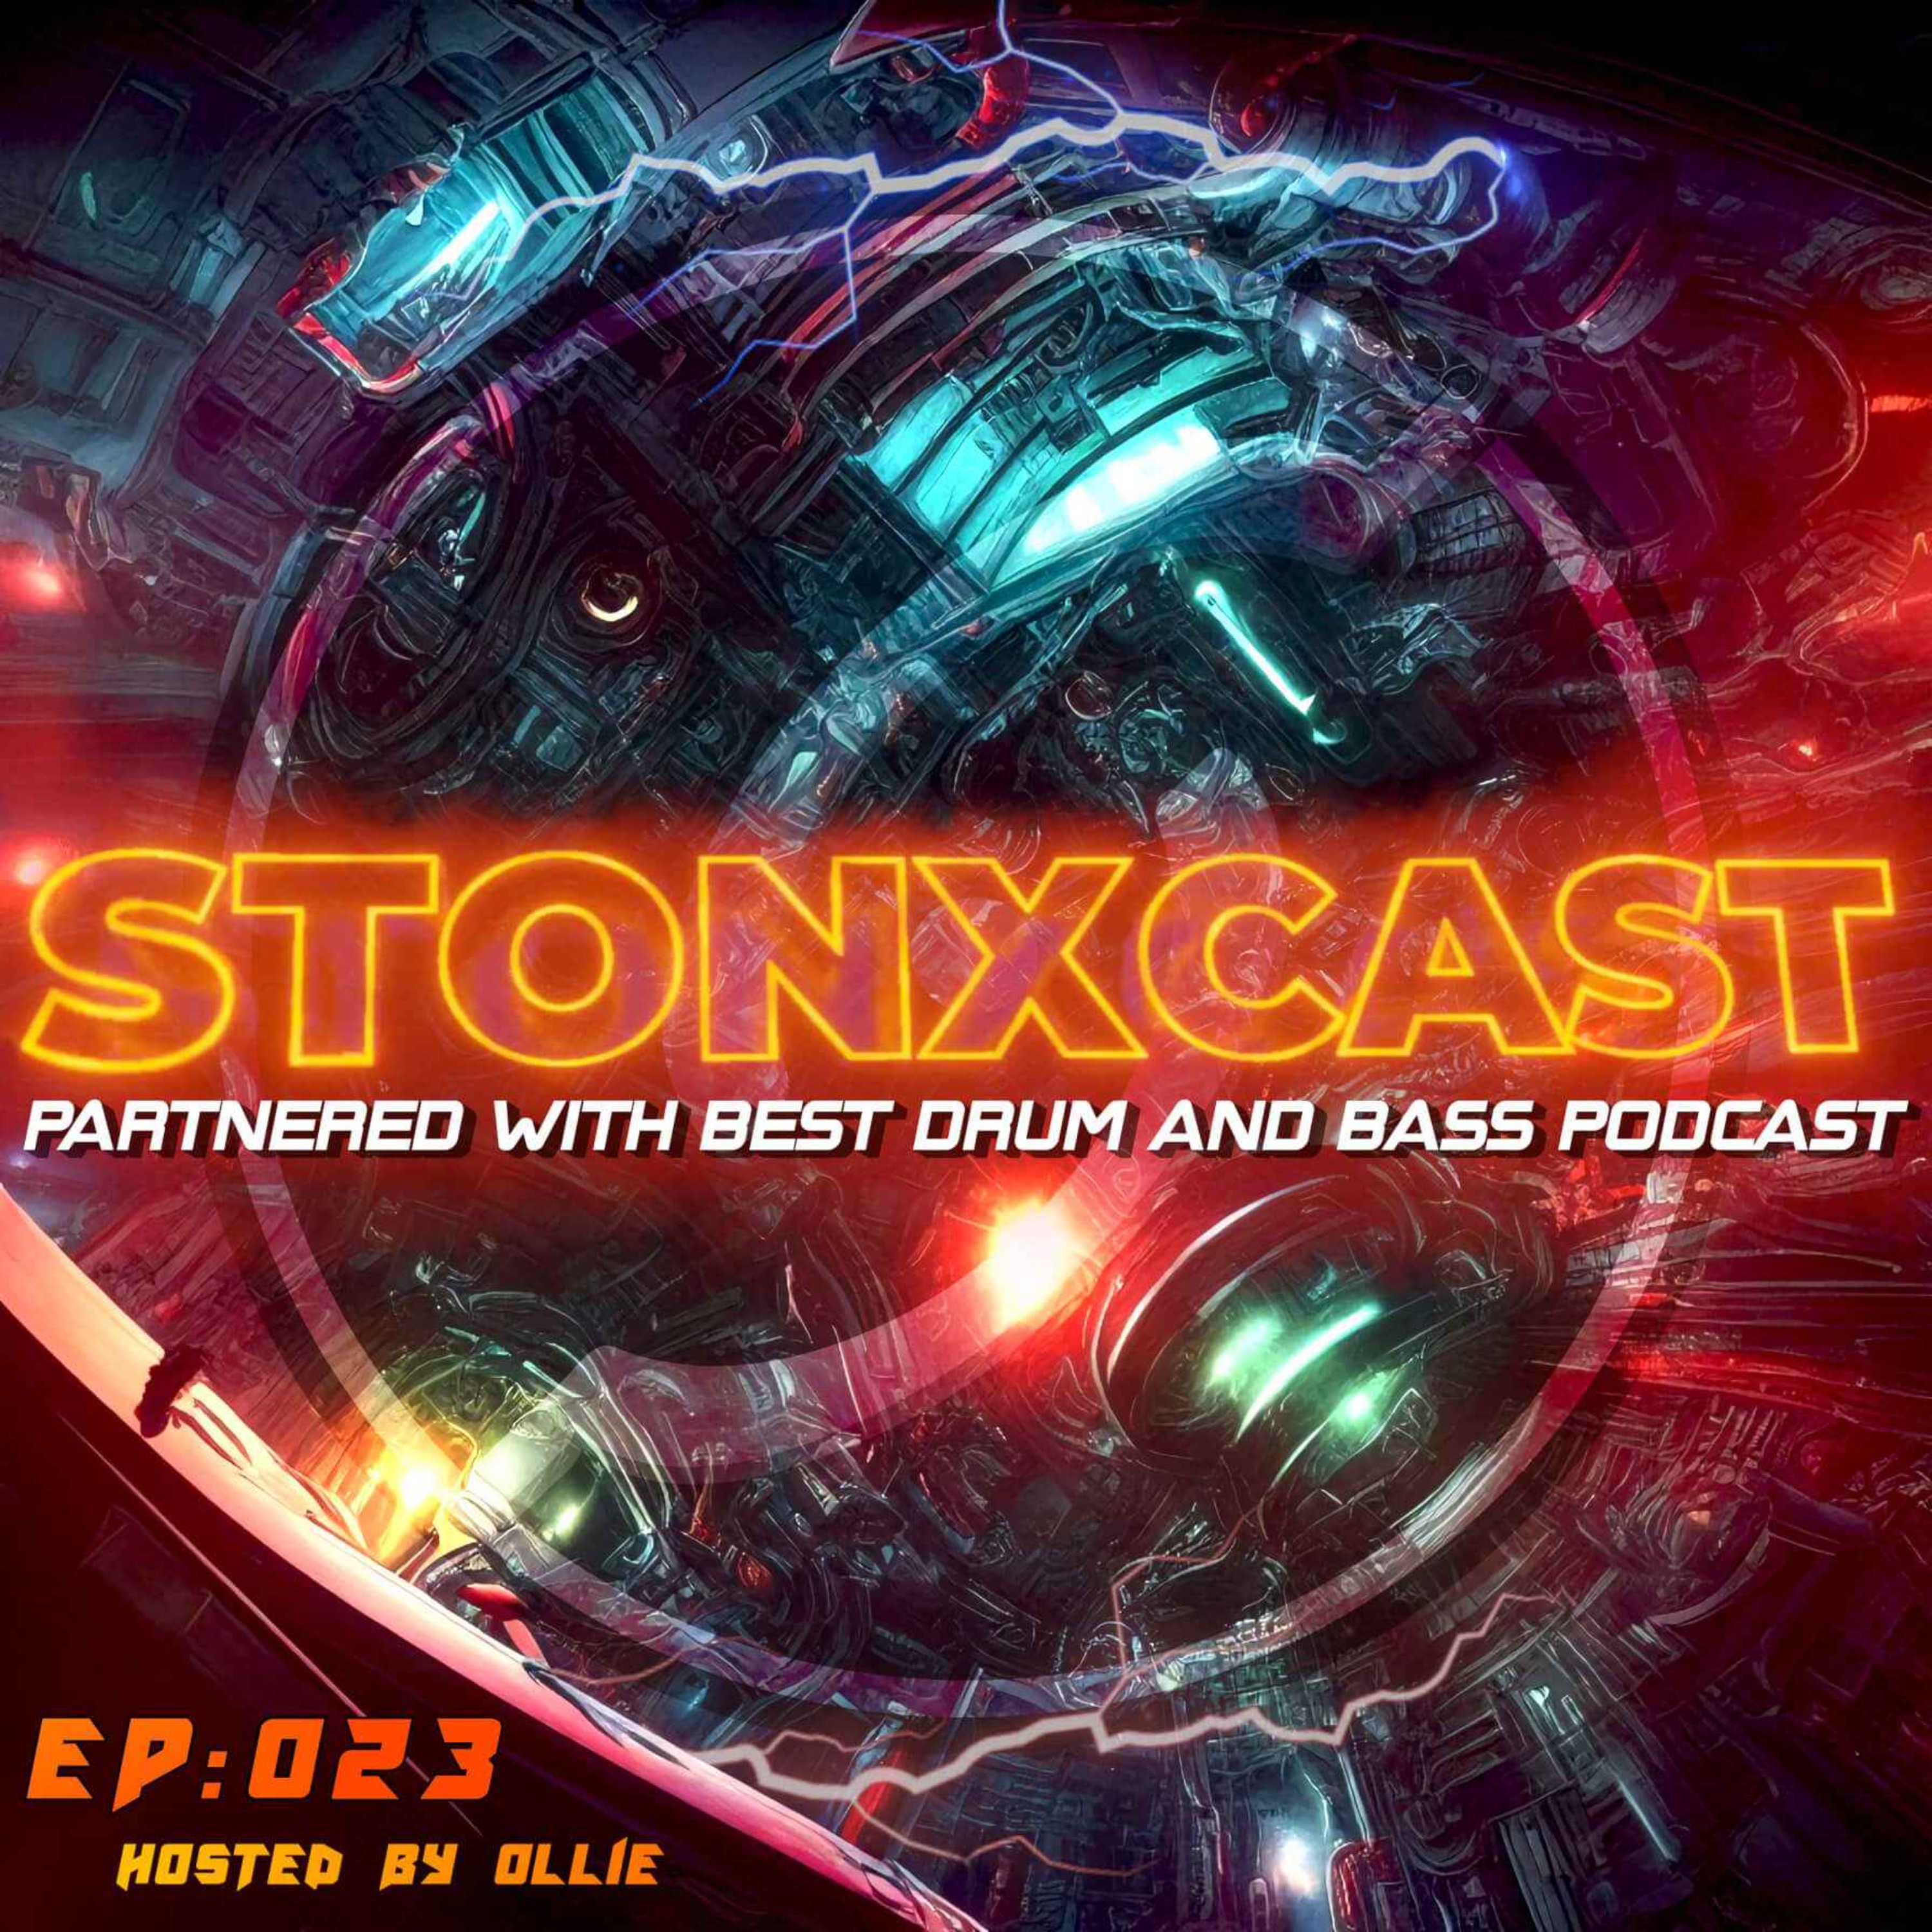 Stonxcast EP:023 - Hosted by Ollie Artwork